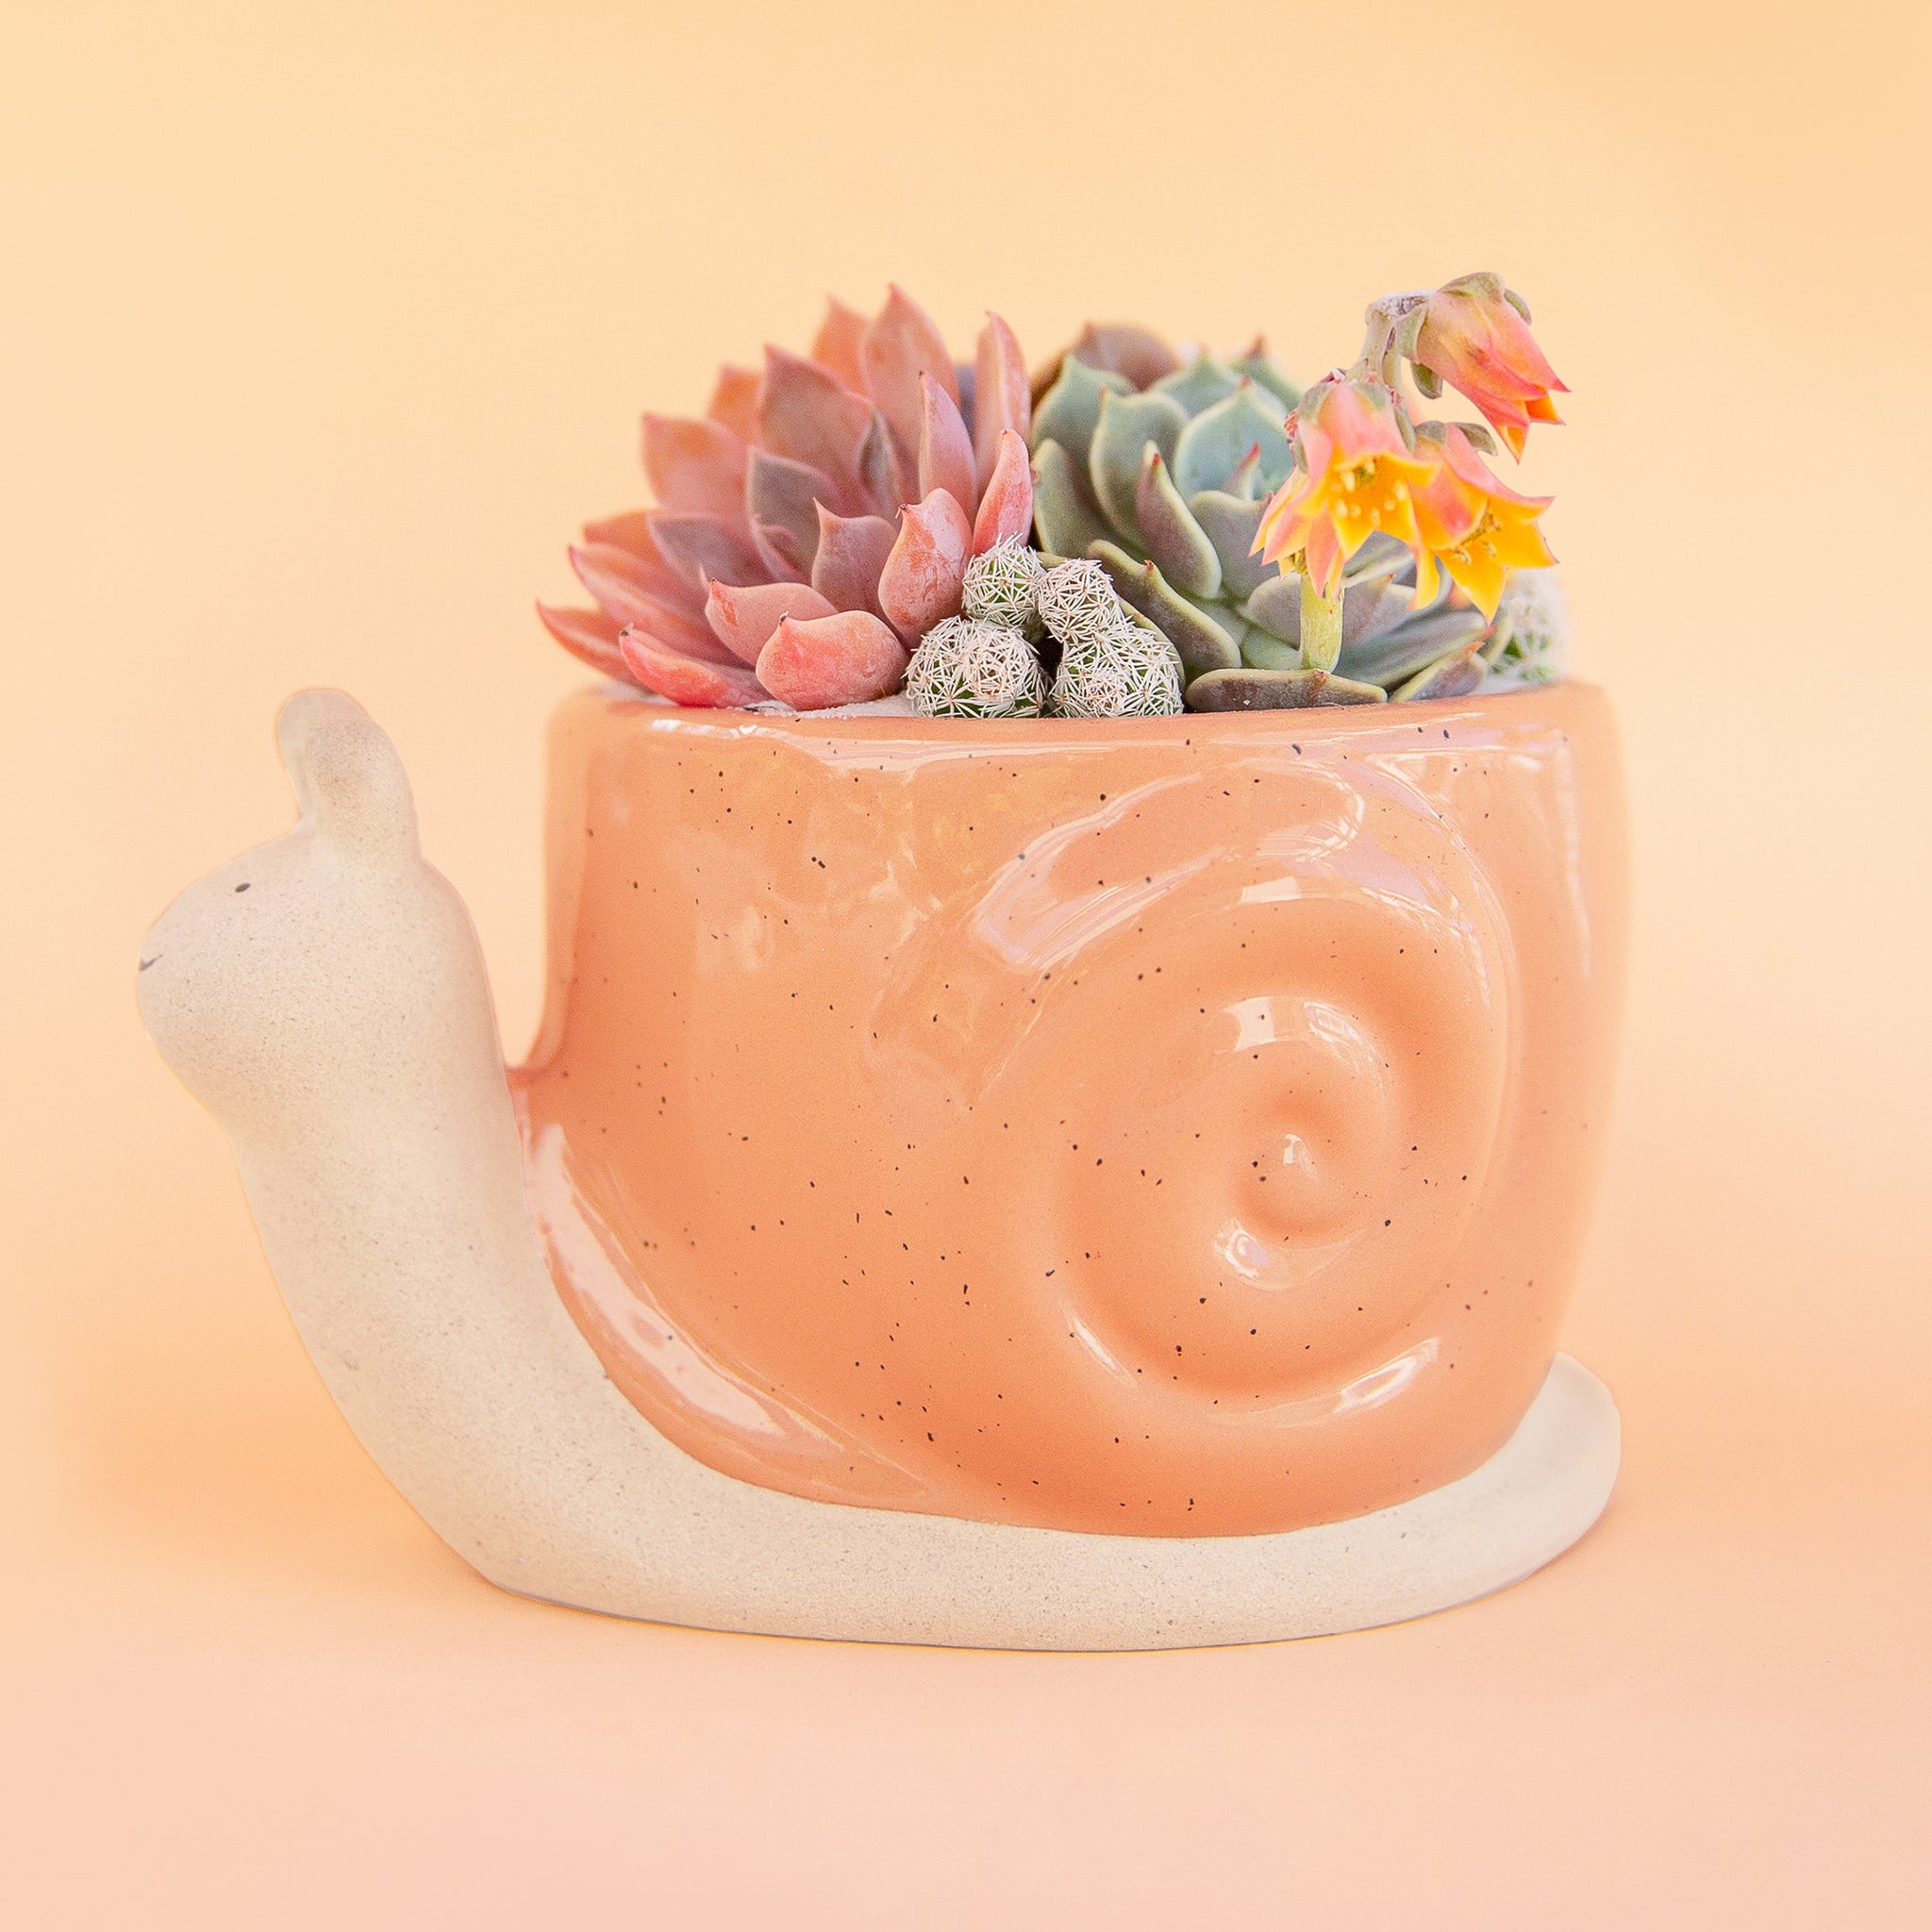 On a peachy background is an orange snail shaped planter filled with a cactus and succulent arrangement.